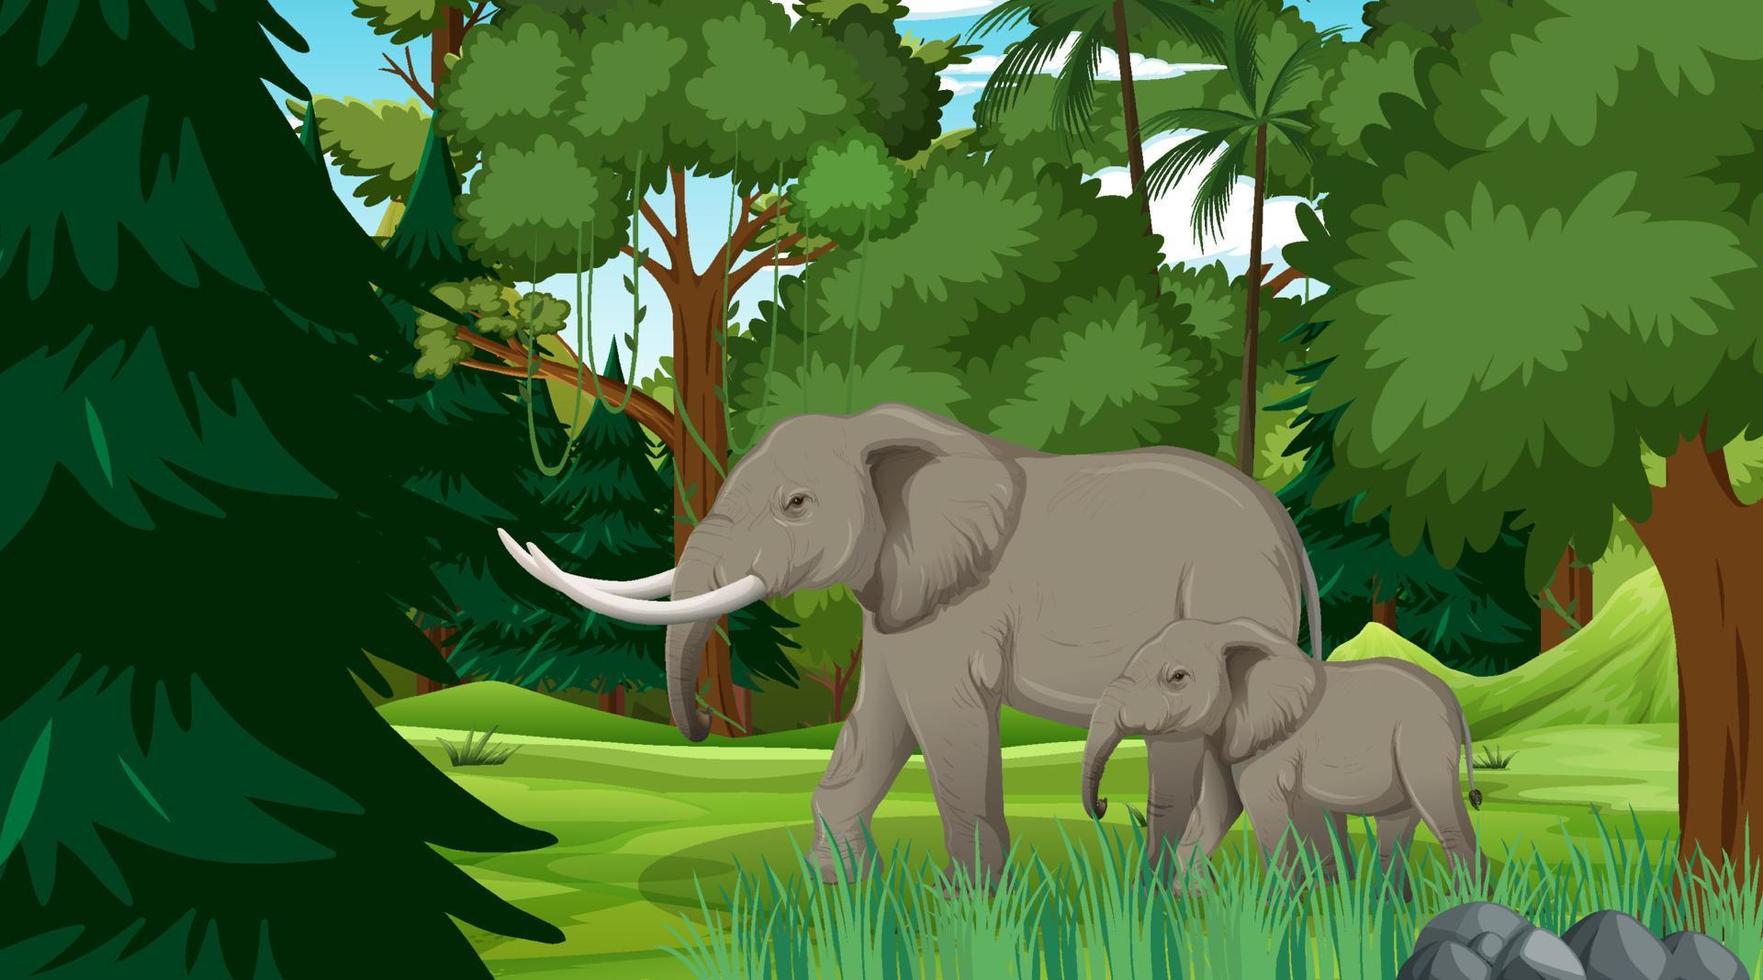 Elephant mom and baby in forest or rainforest scene with many trees vector